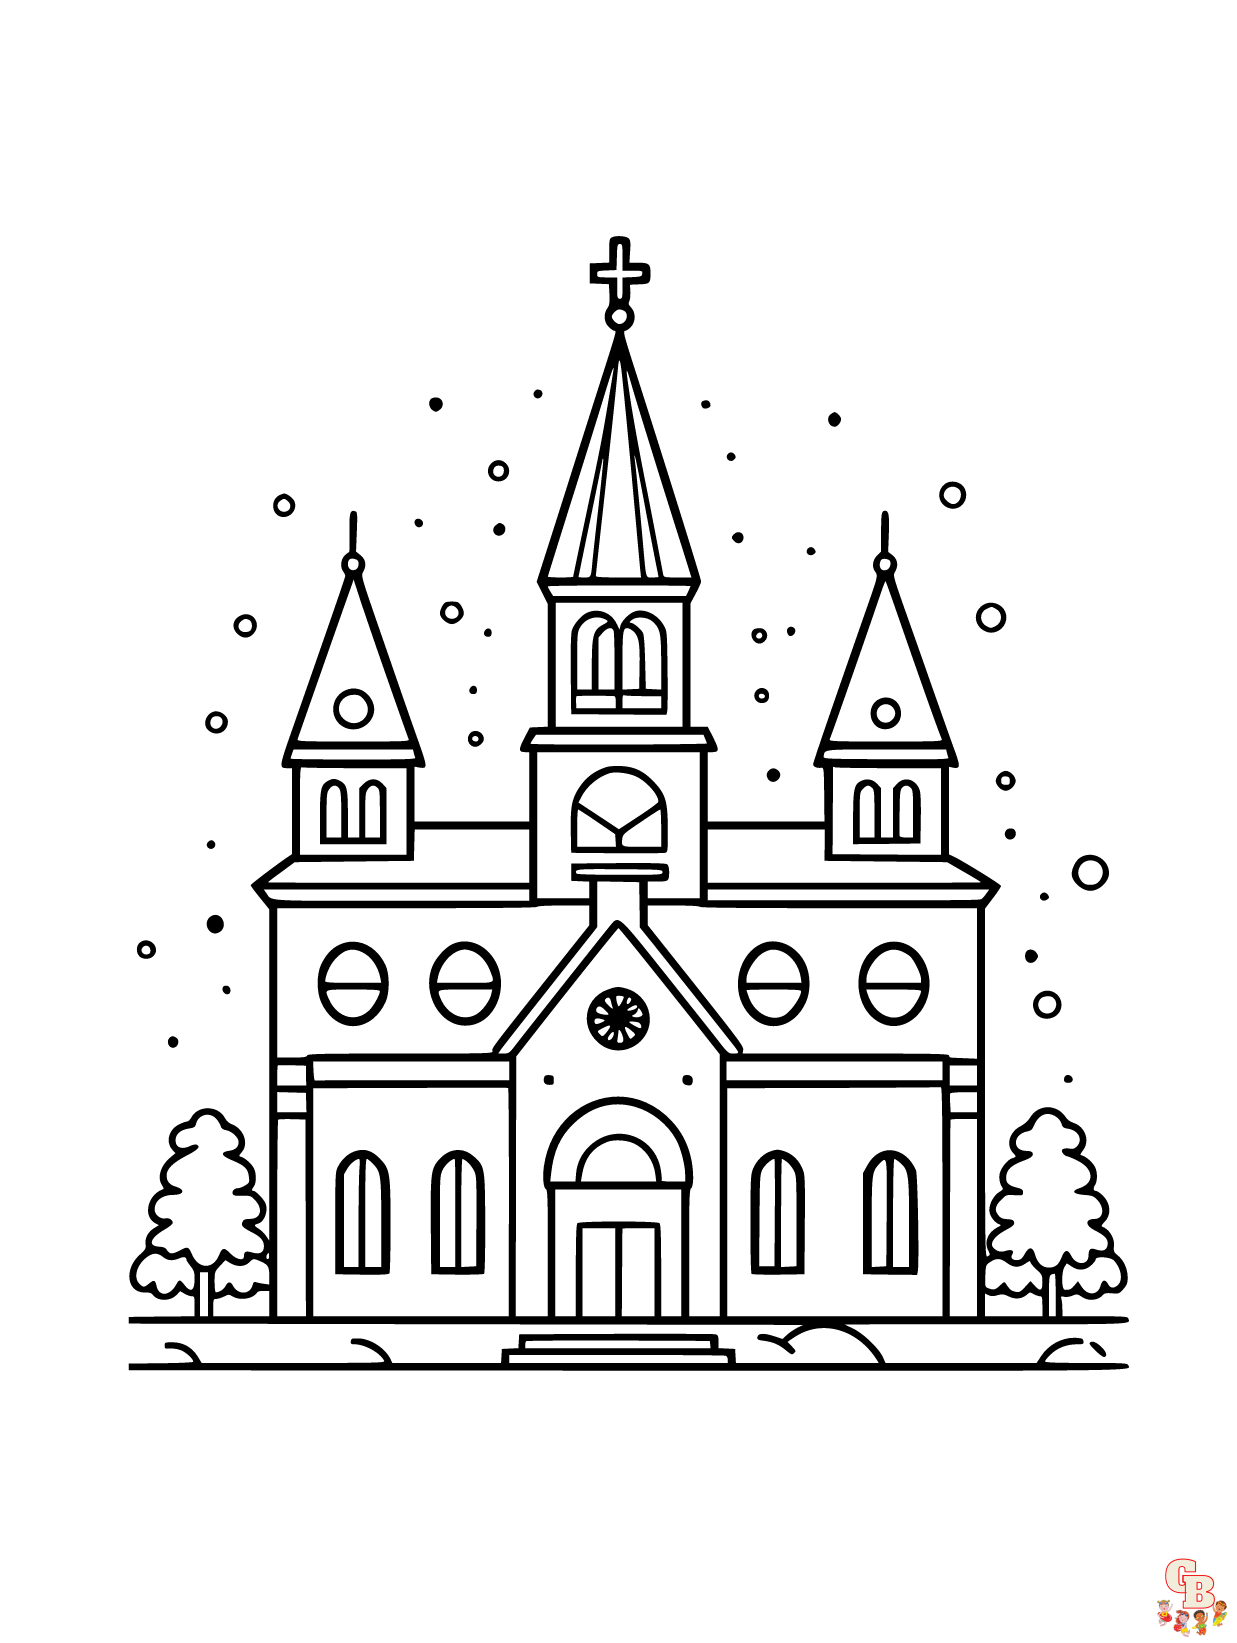 Free Church coloring pages for kids